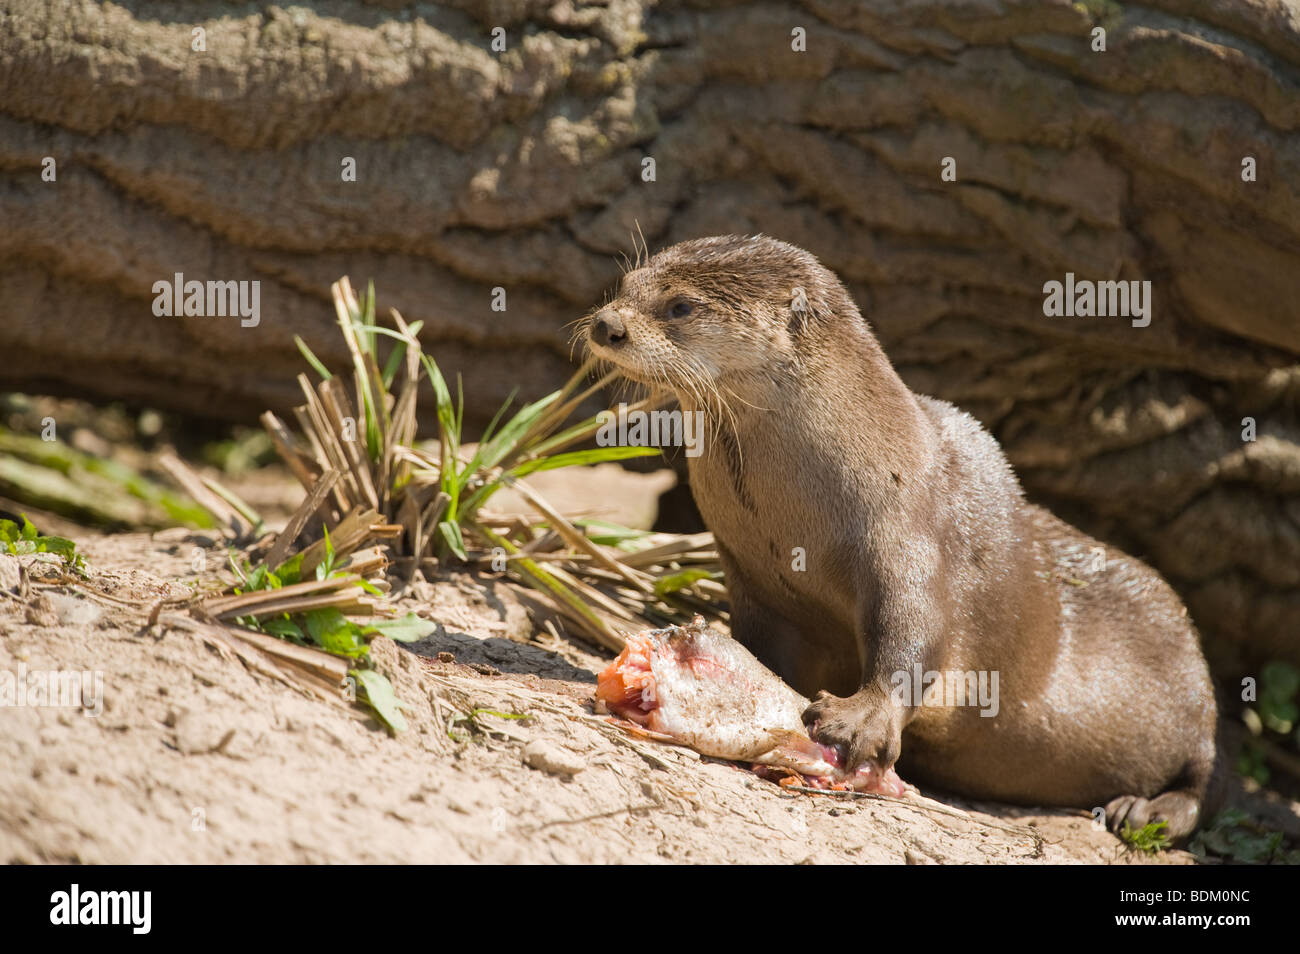 North American River Otter Lontra canadensis feeding on fish on a river bank. Stock Photo